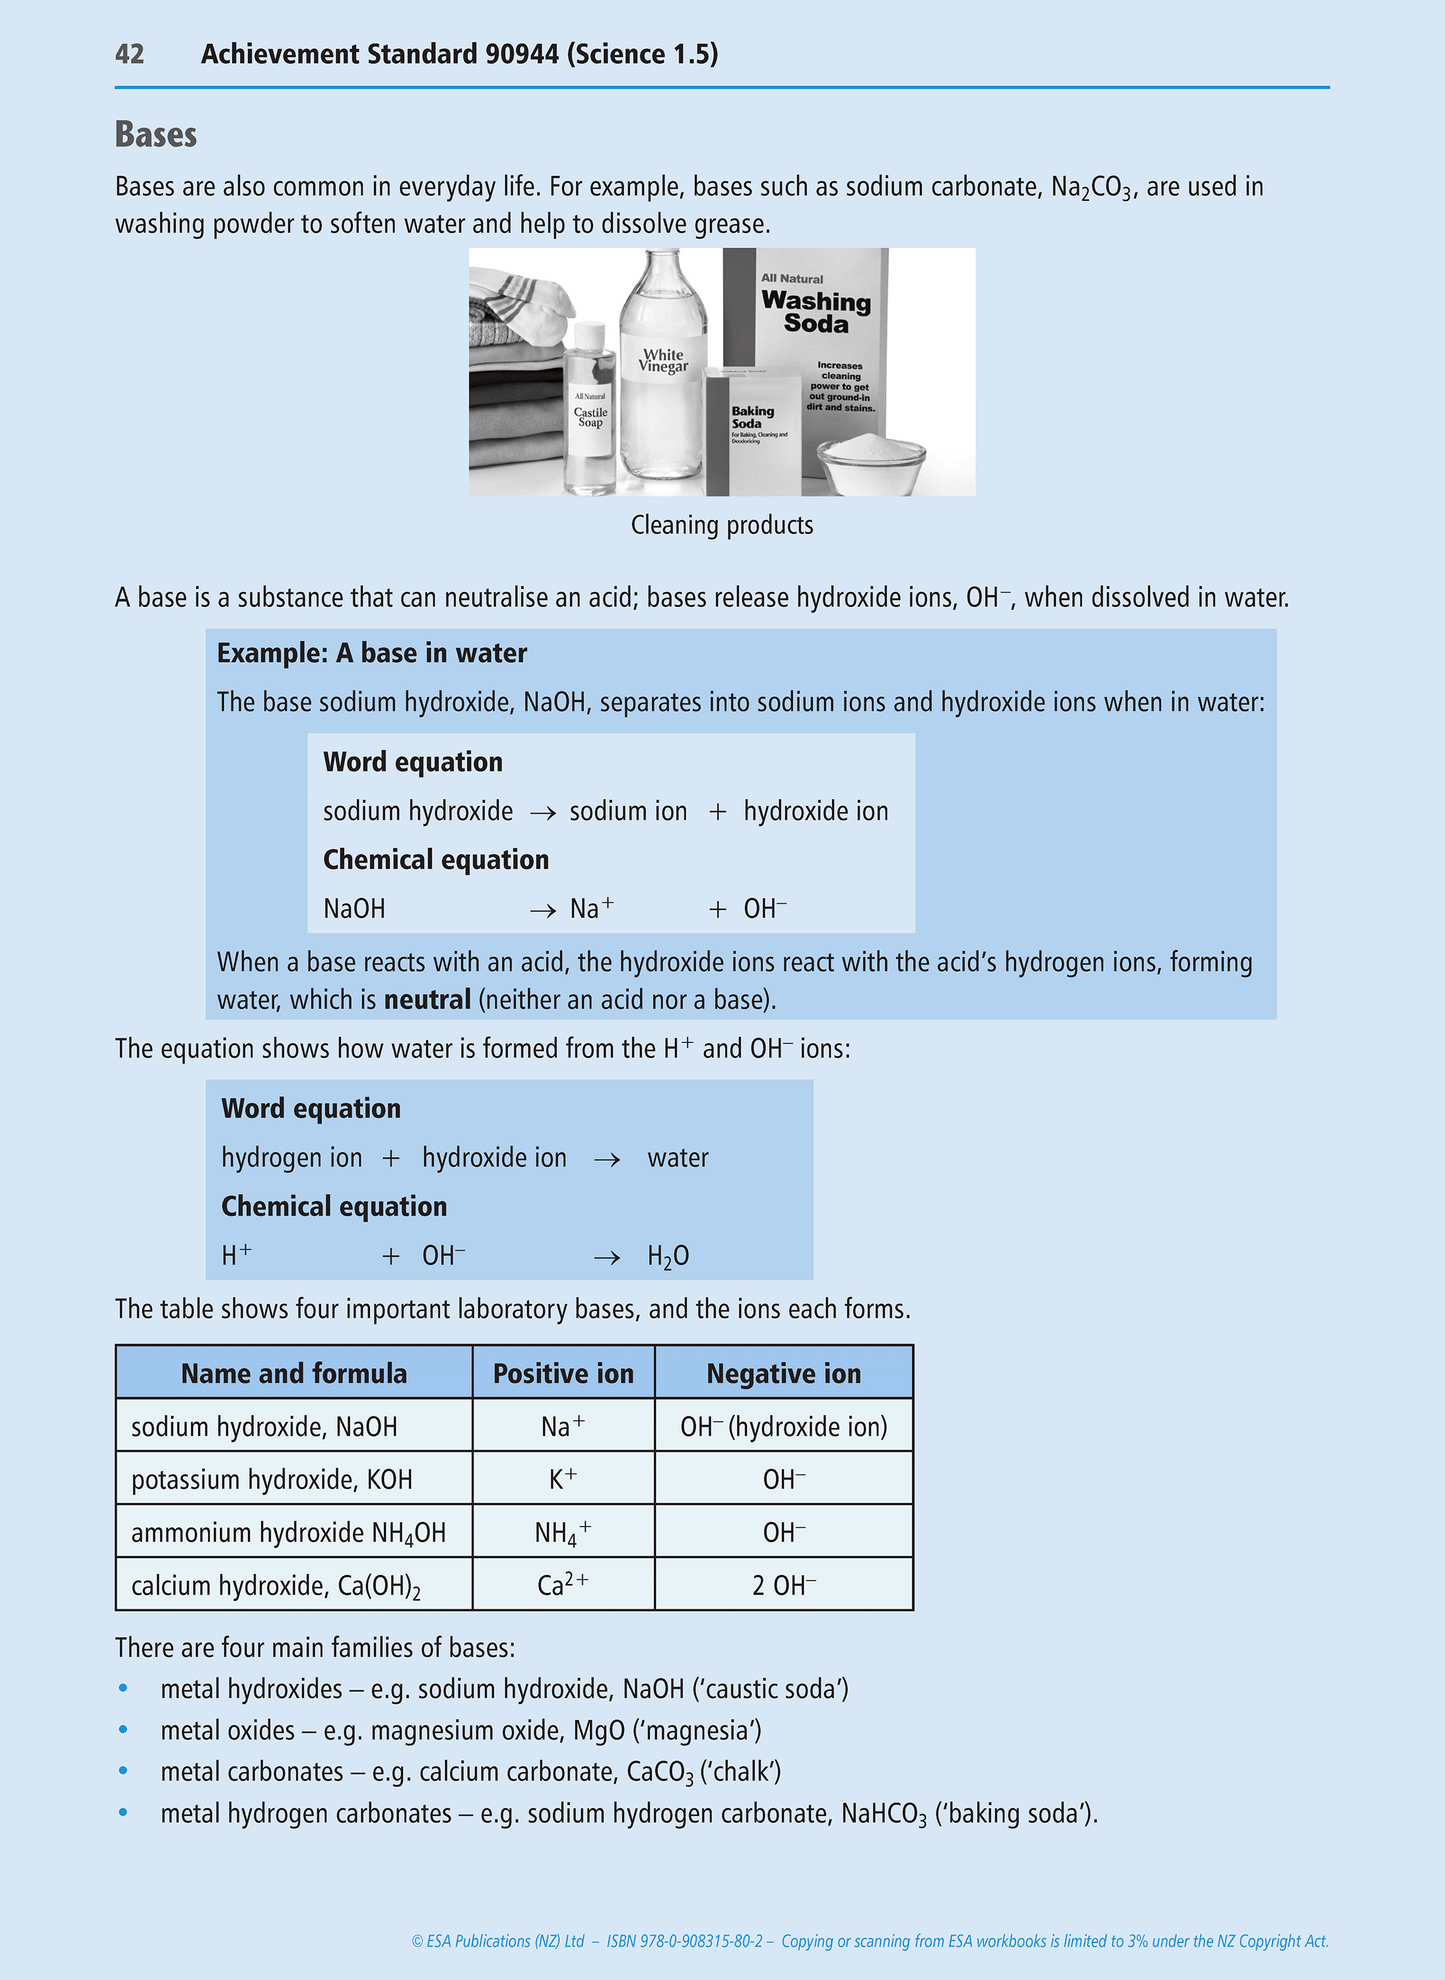 Level 1 Acids and Bases 1.5 Learning Workbook